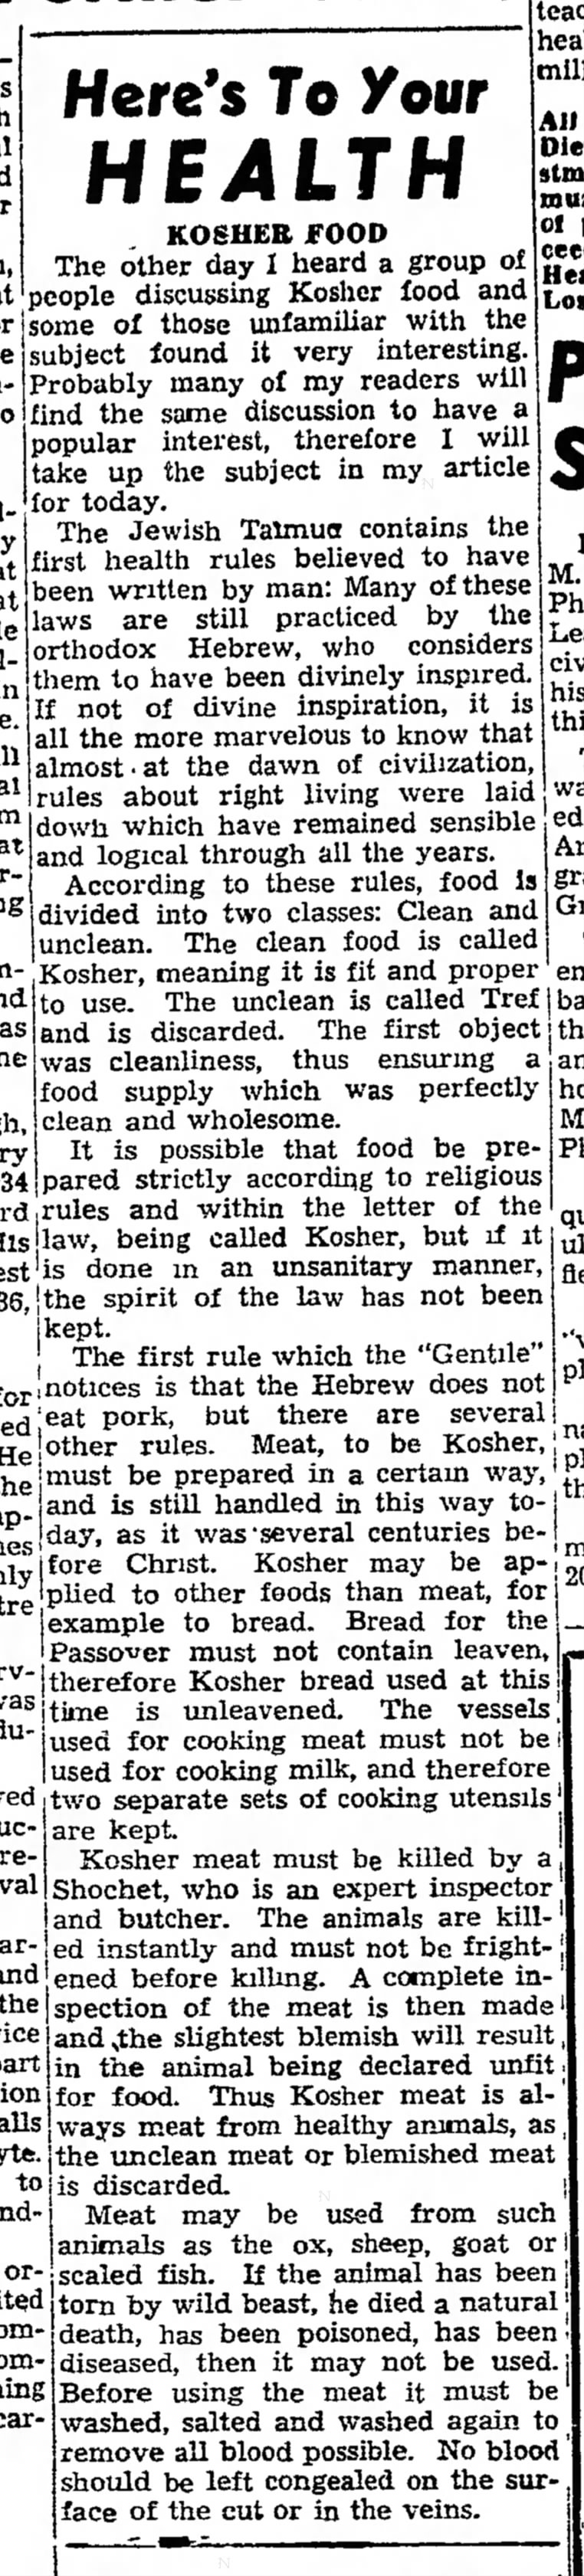 Kosher food, discussed in Indiana, PA column